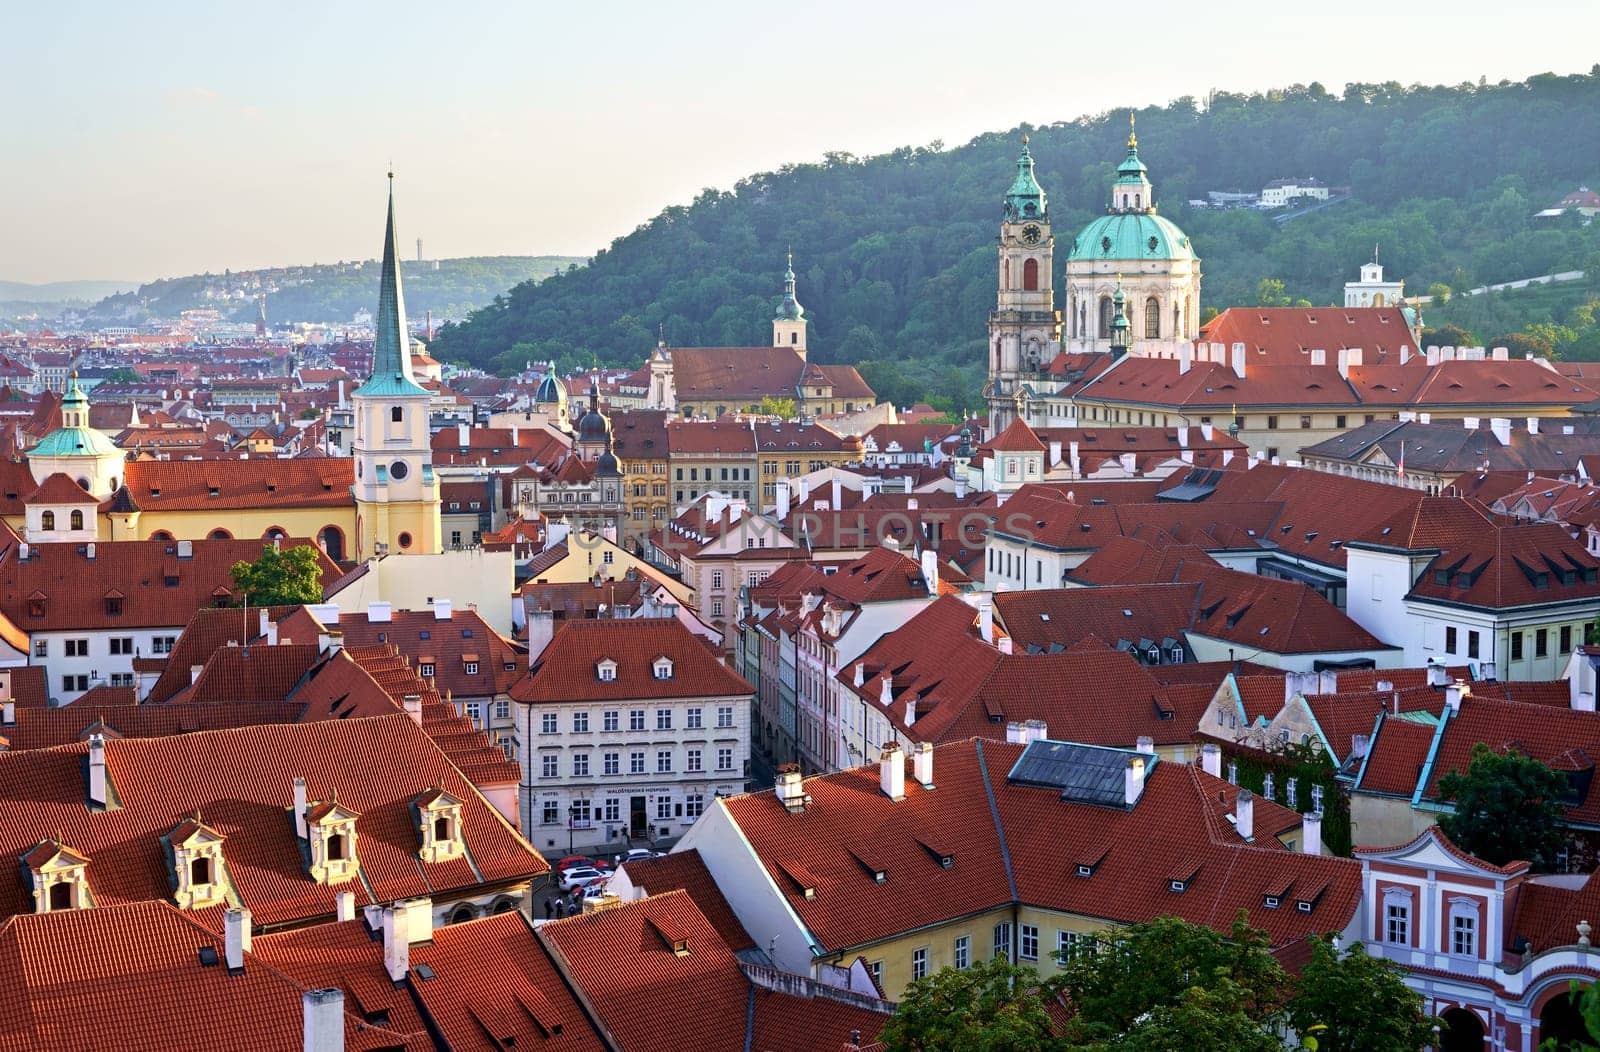 View of the red tiled roofs of the old town of Prague. Concept - tourism, travel.